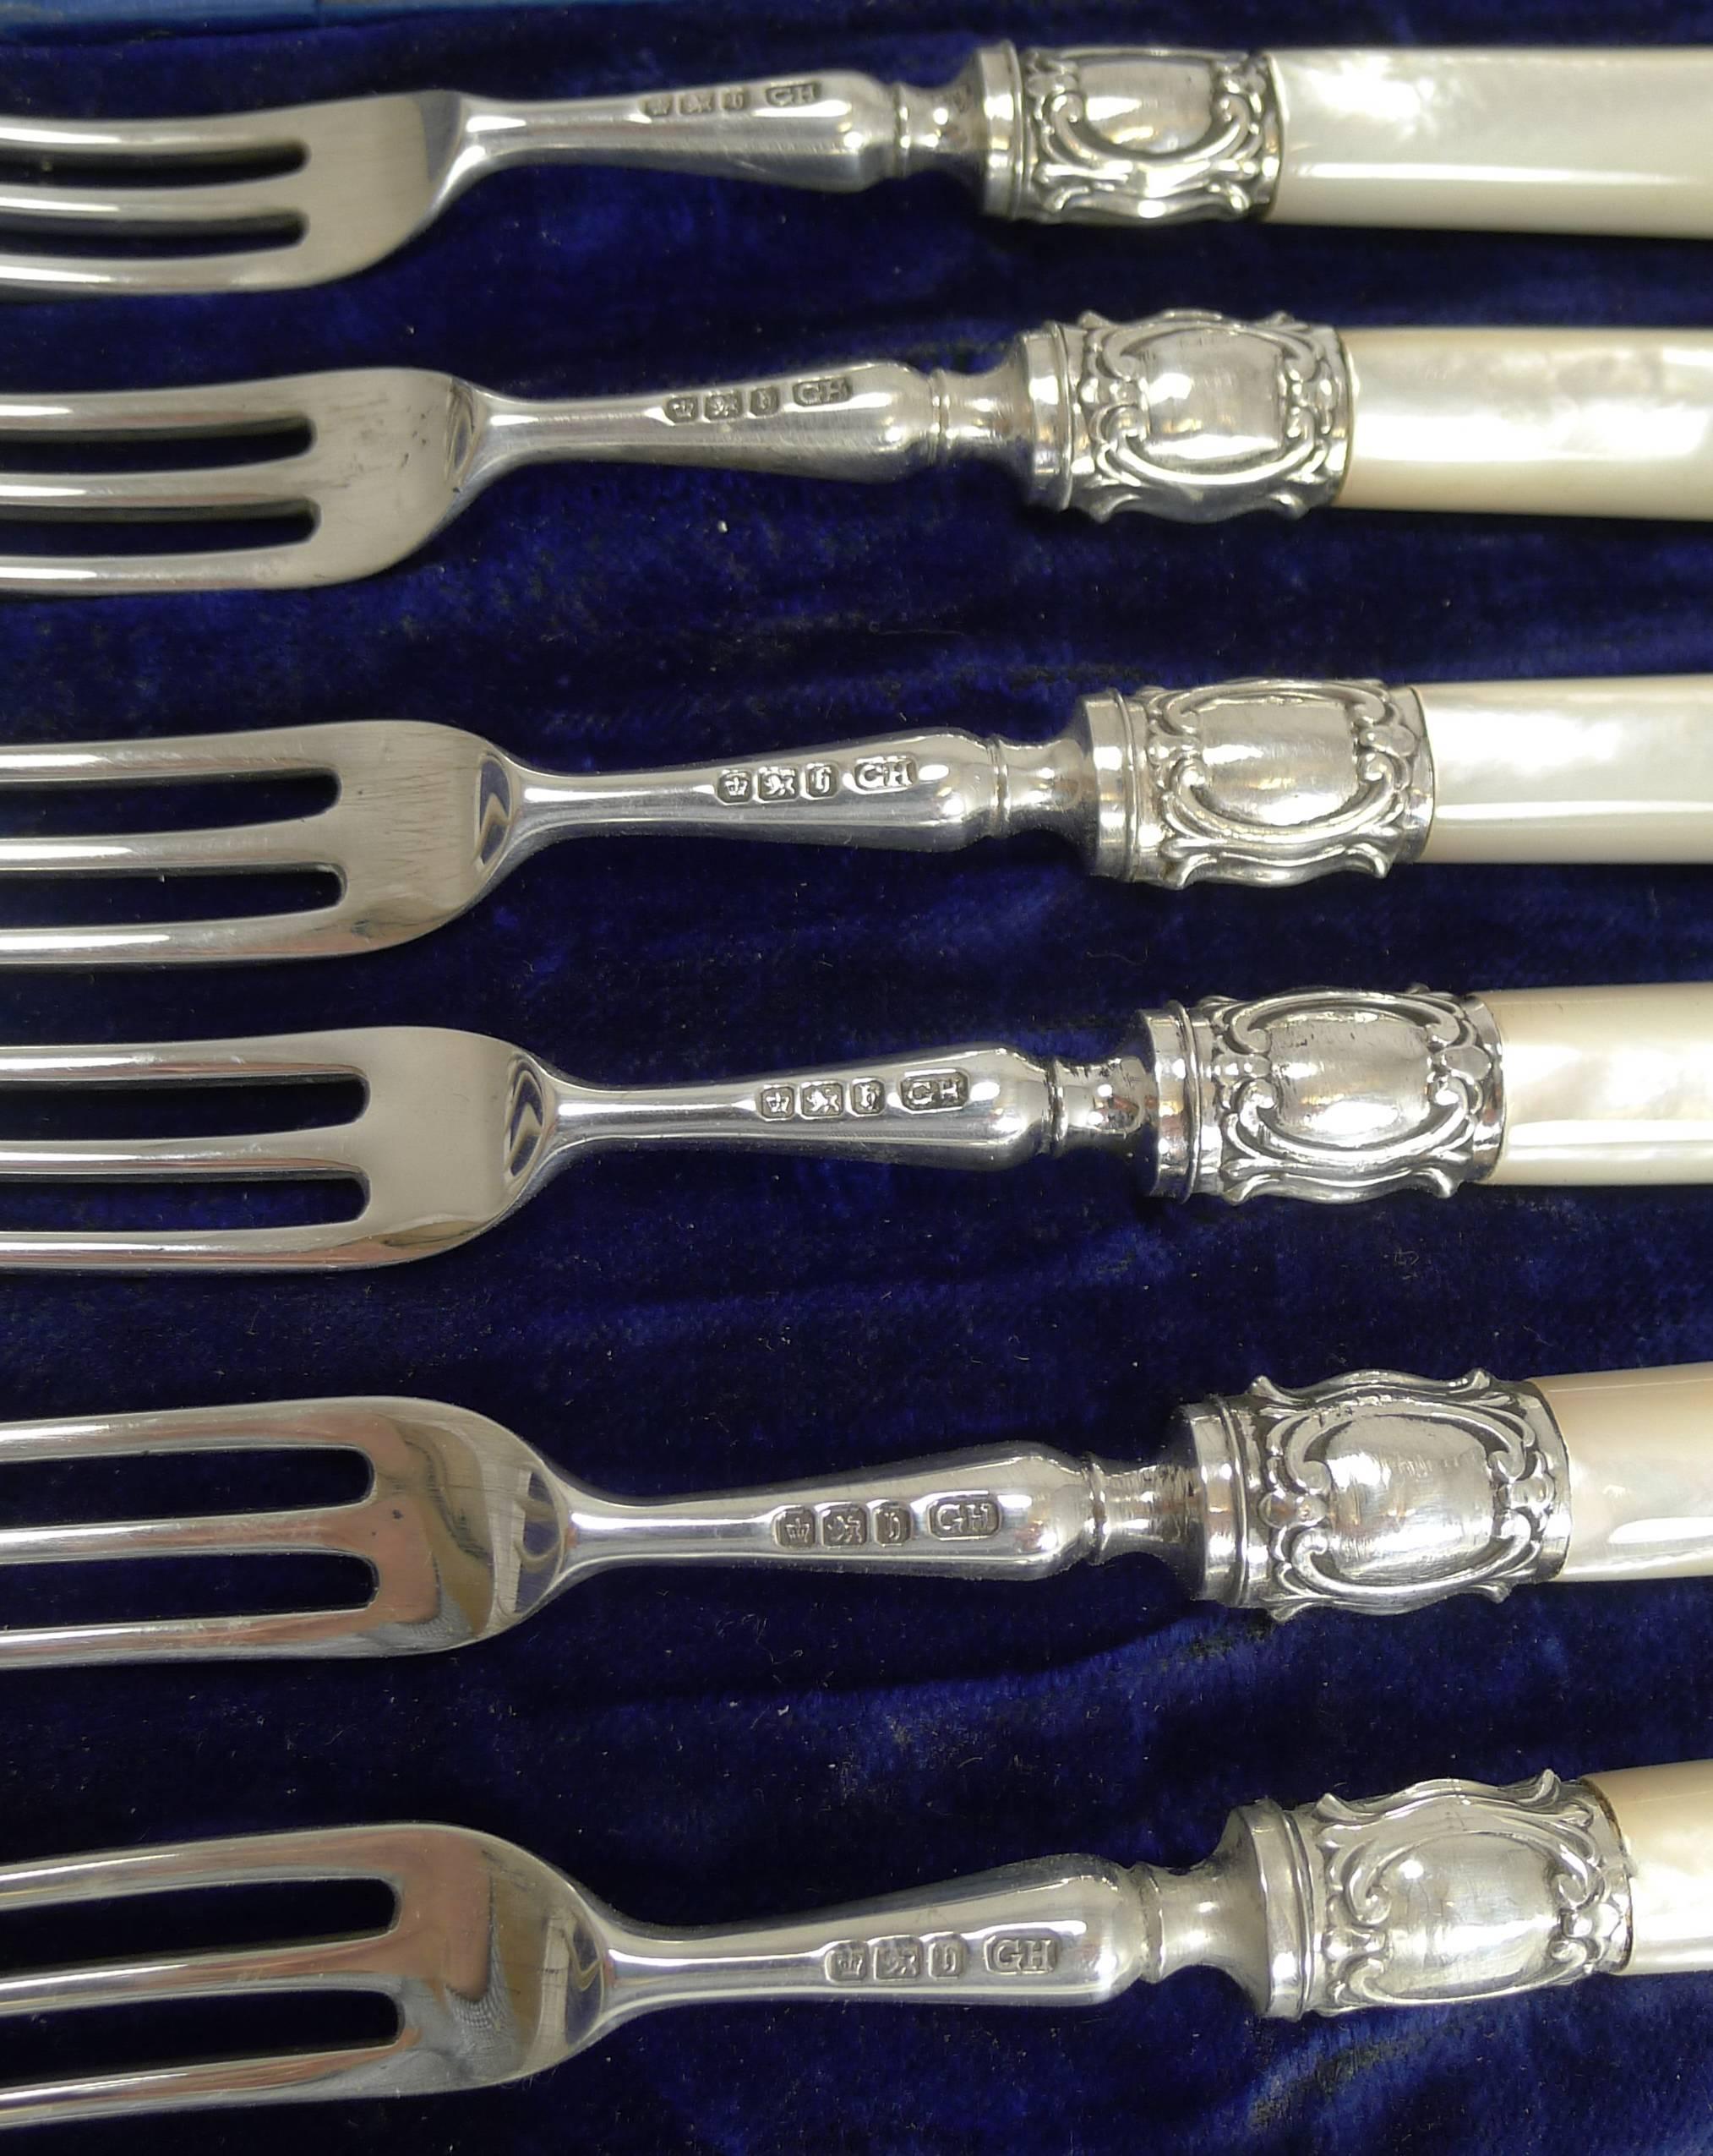 A wonderful set of six desert, fruit or cake forks sitting in a presentation box, these would make a wonderful gift.

The forks are made from sterling silver, made by the silversmith George Howson, and each hallmarked for Sheffield 1900, late